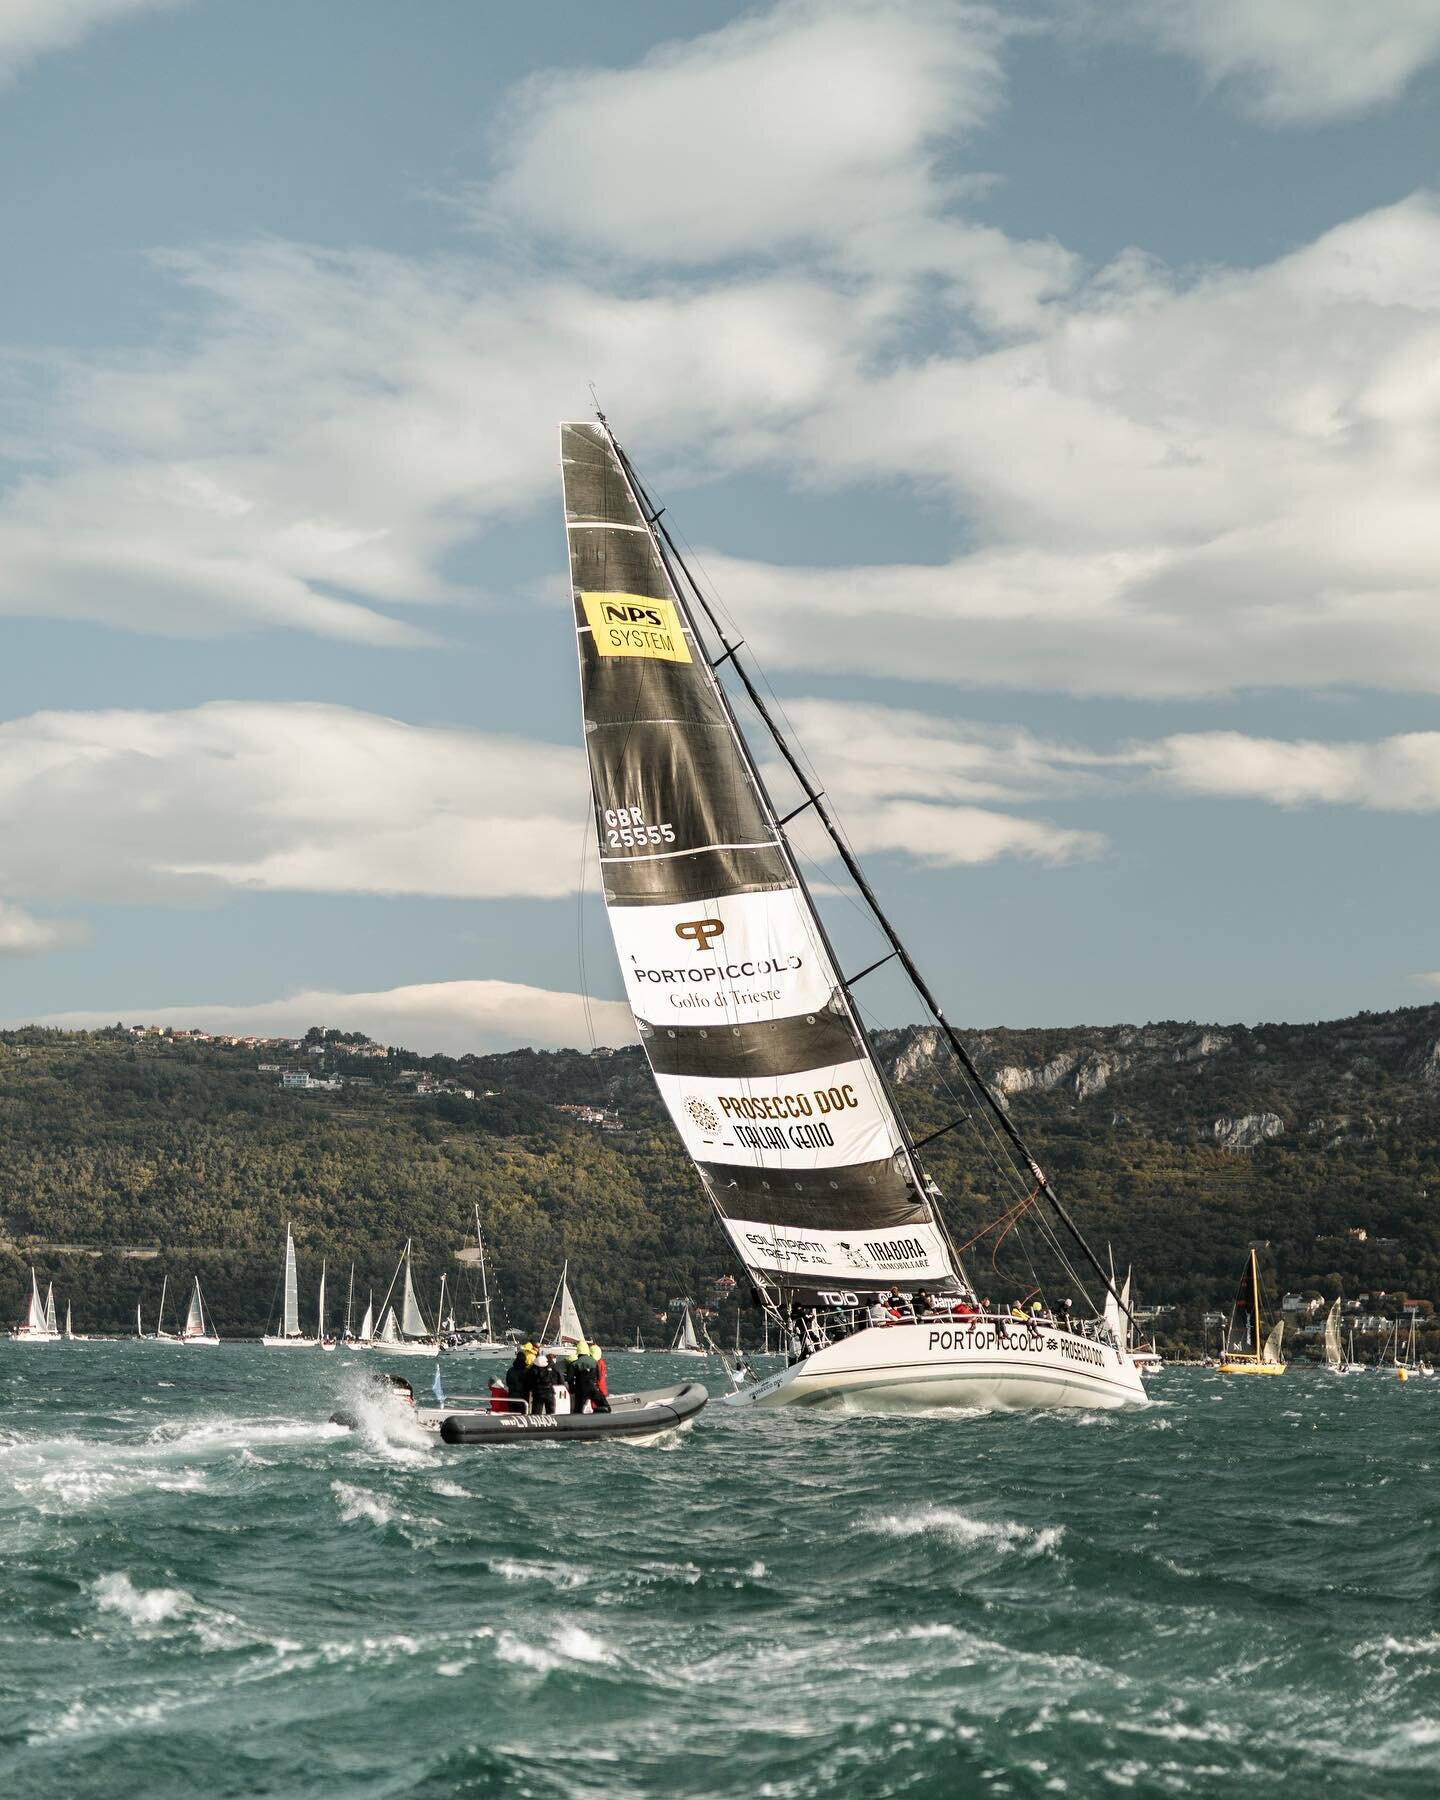 Long time no see Instagram! 

Here is the Portopiccolo Prosecco DOC ⛵️ in action at Barcolana 53rd last year 
You won&rsquo;t believe how fast these things are unless you are on them.

⛵️⛵️⛵️

Few images from Barcolana 53rd shot last year for @car_vi